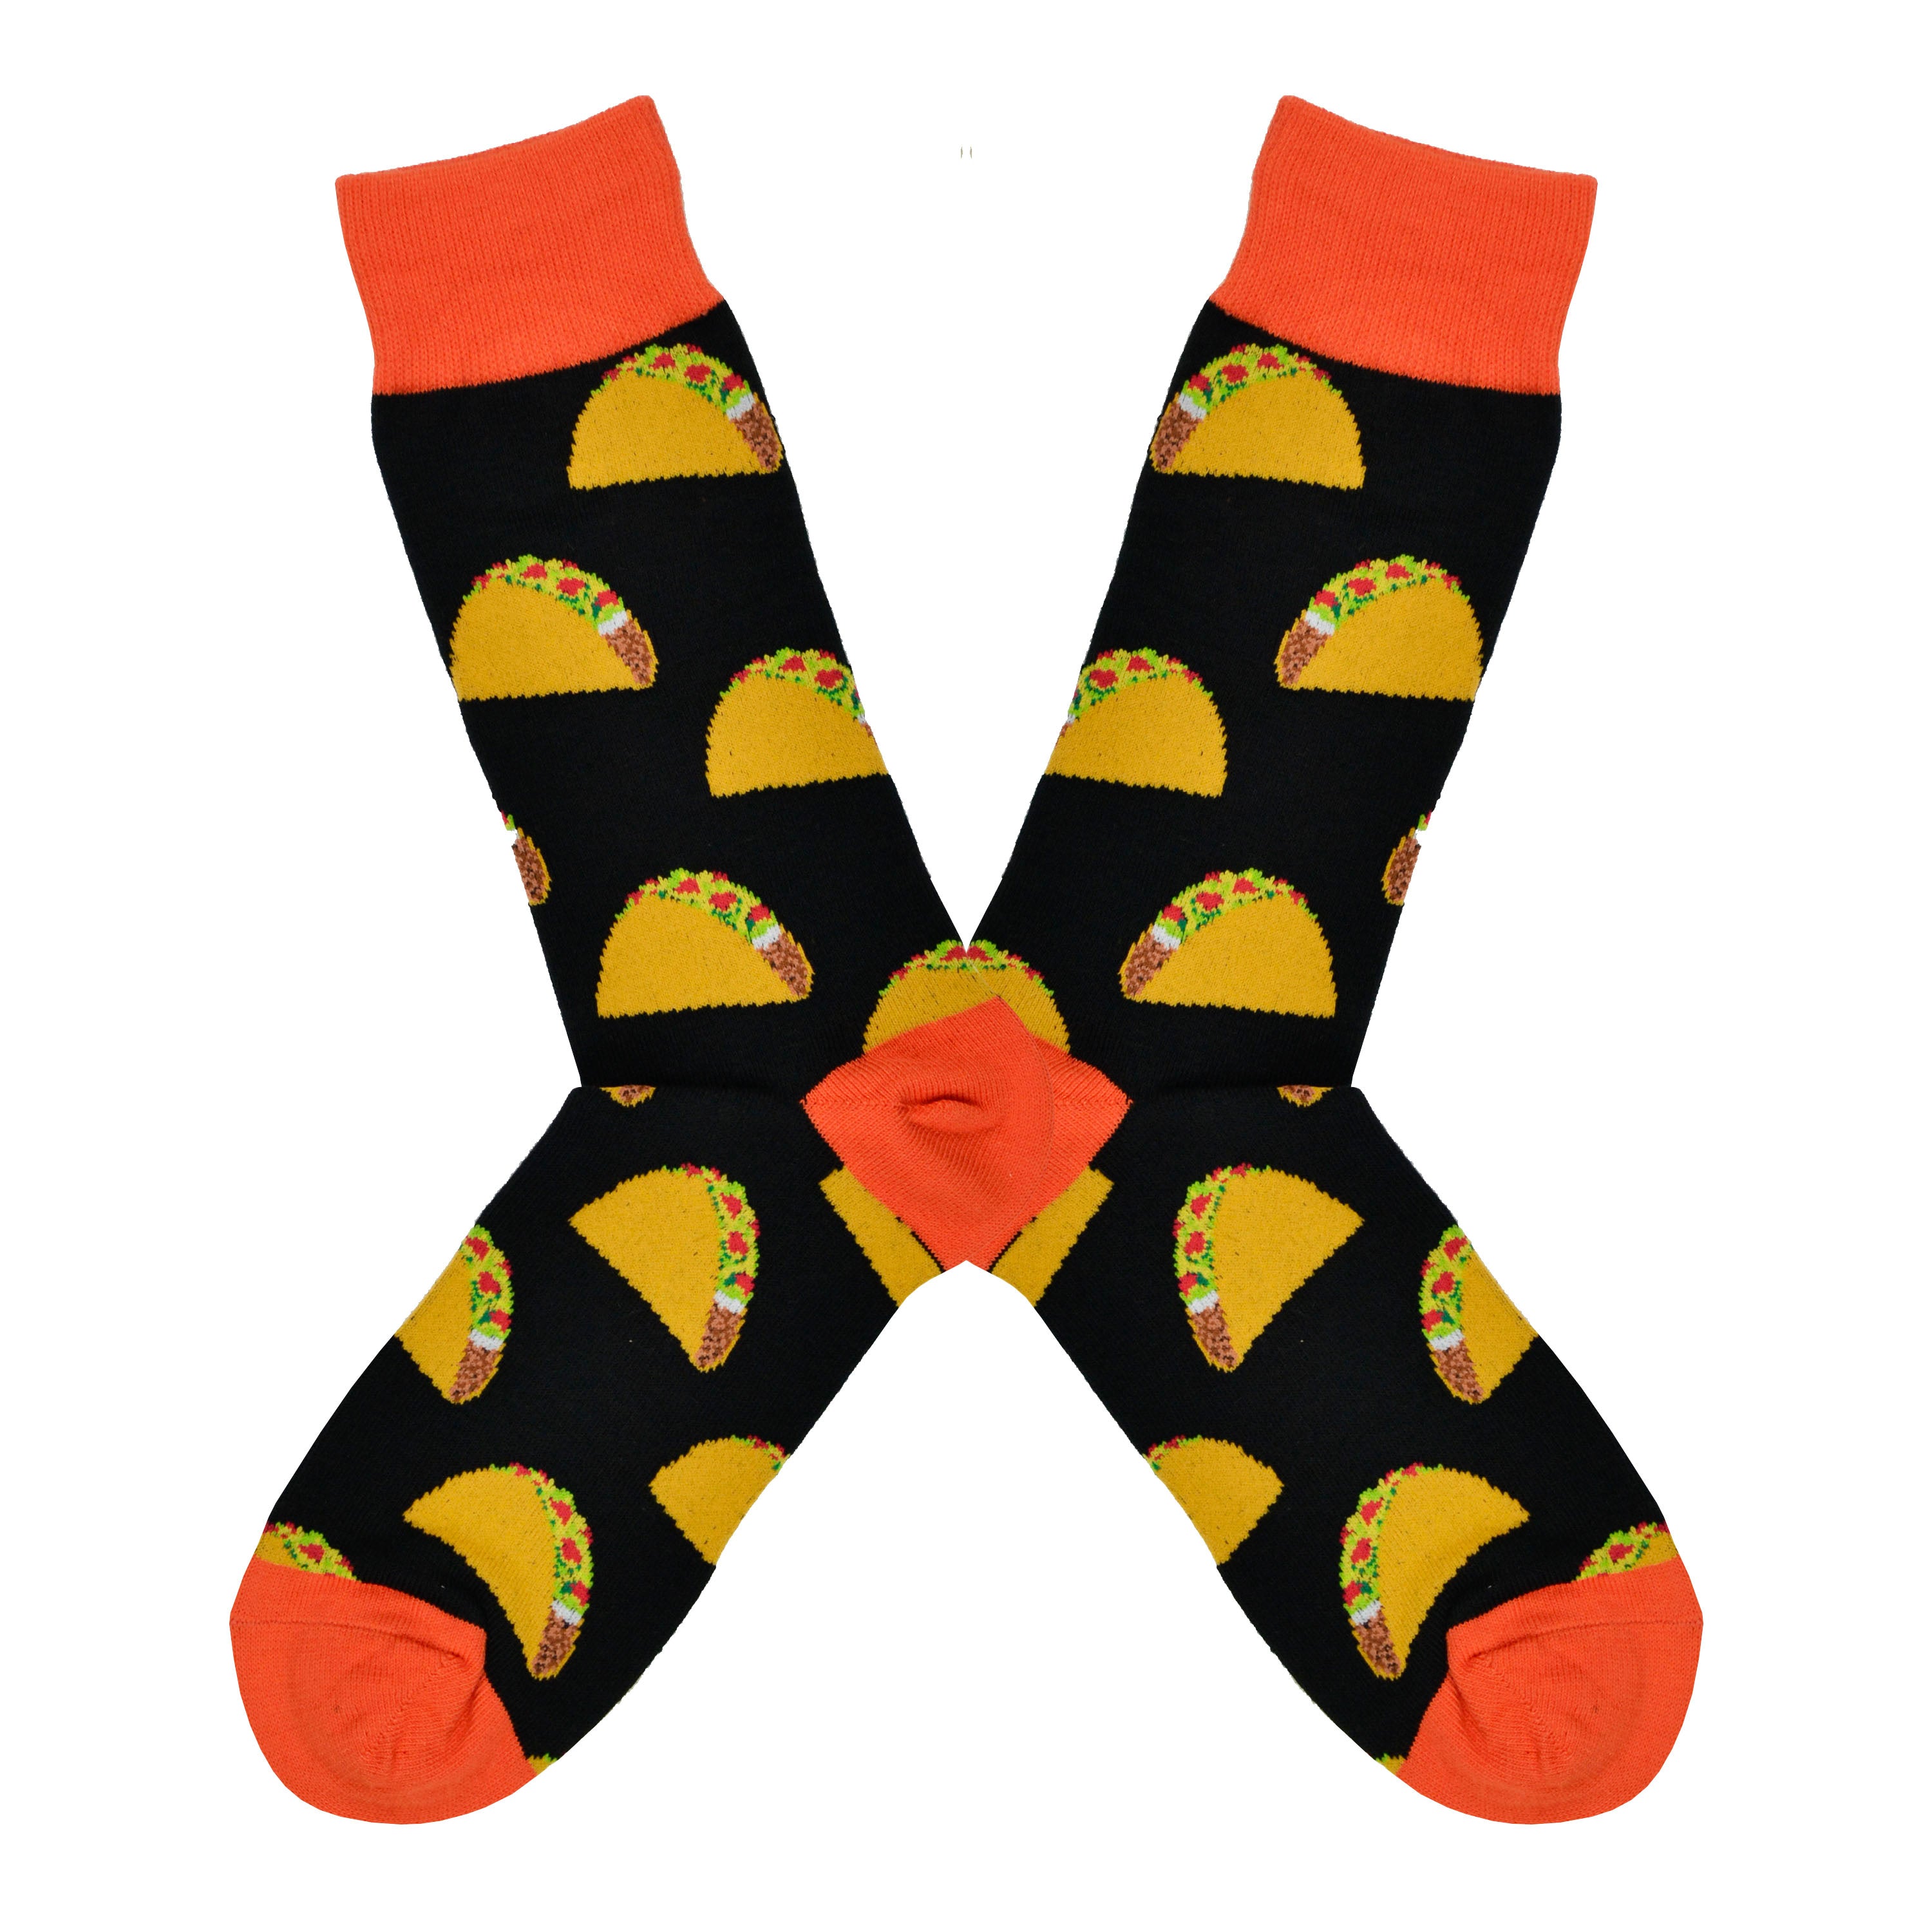 Shown in a flatlay, a pair of Socksmith's black cotton men's crew socks with orange cuff/heel/toe and all-over pattern of delicious hardshell tacos